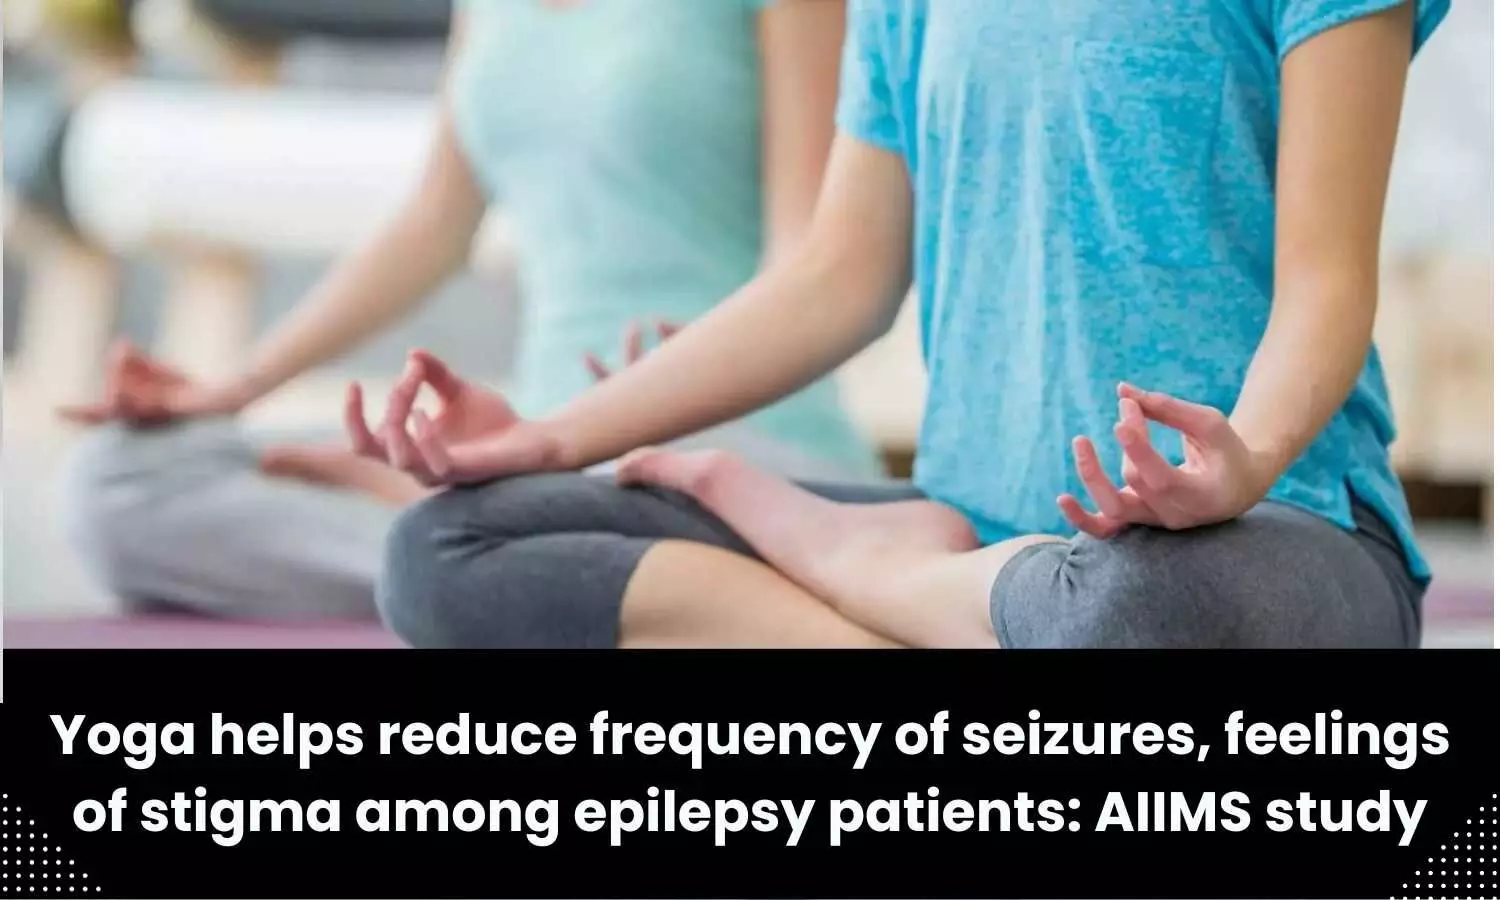 Yoga helps reduce frequency of seizures, feelings of stigma among epilepsy patients: AIIMS study